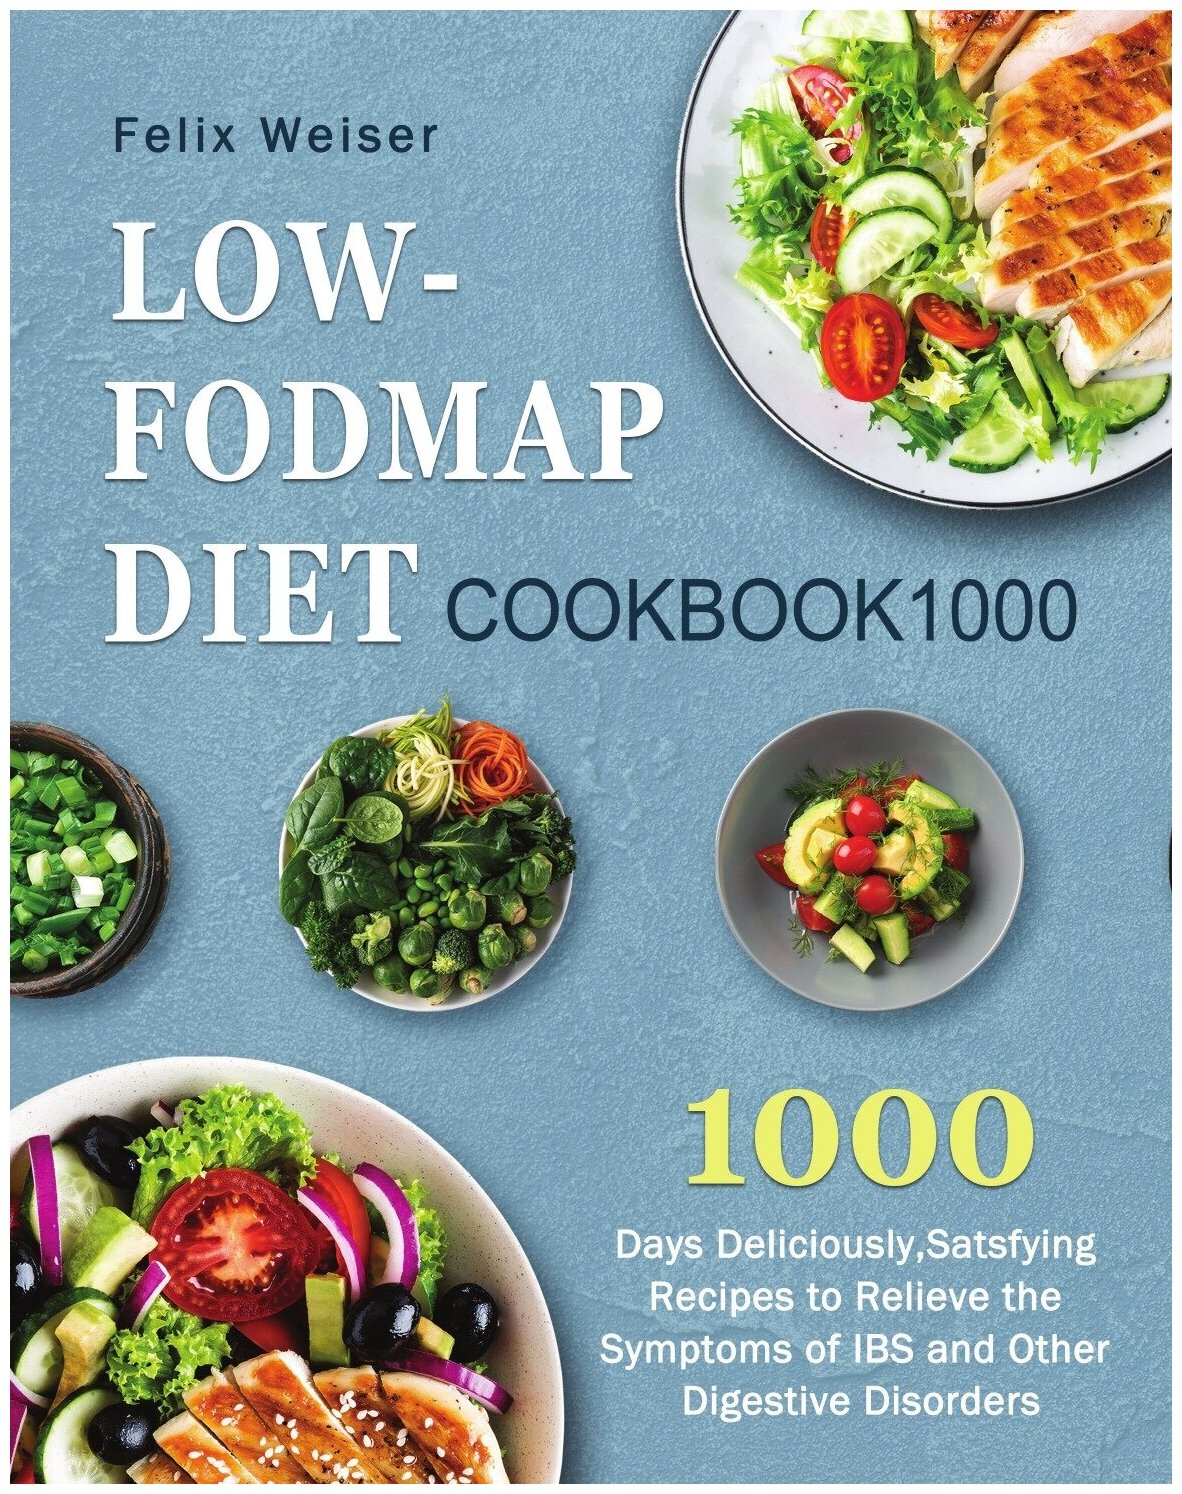 Low-FODMAP Diet Cookbook1000. 1000 Days Deliciously, Satsfying Recipes to Relieve the Symptoms of IBS and Other Digestive Disorders